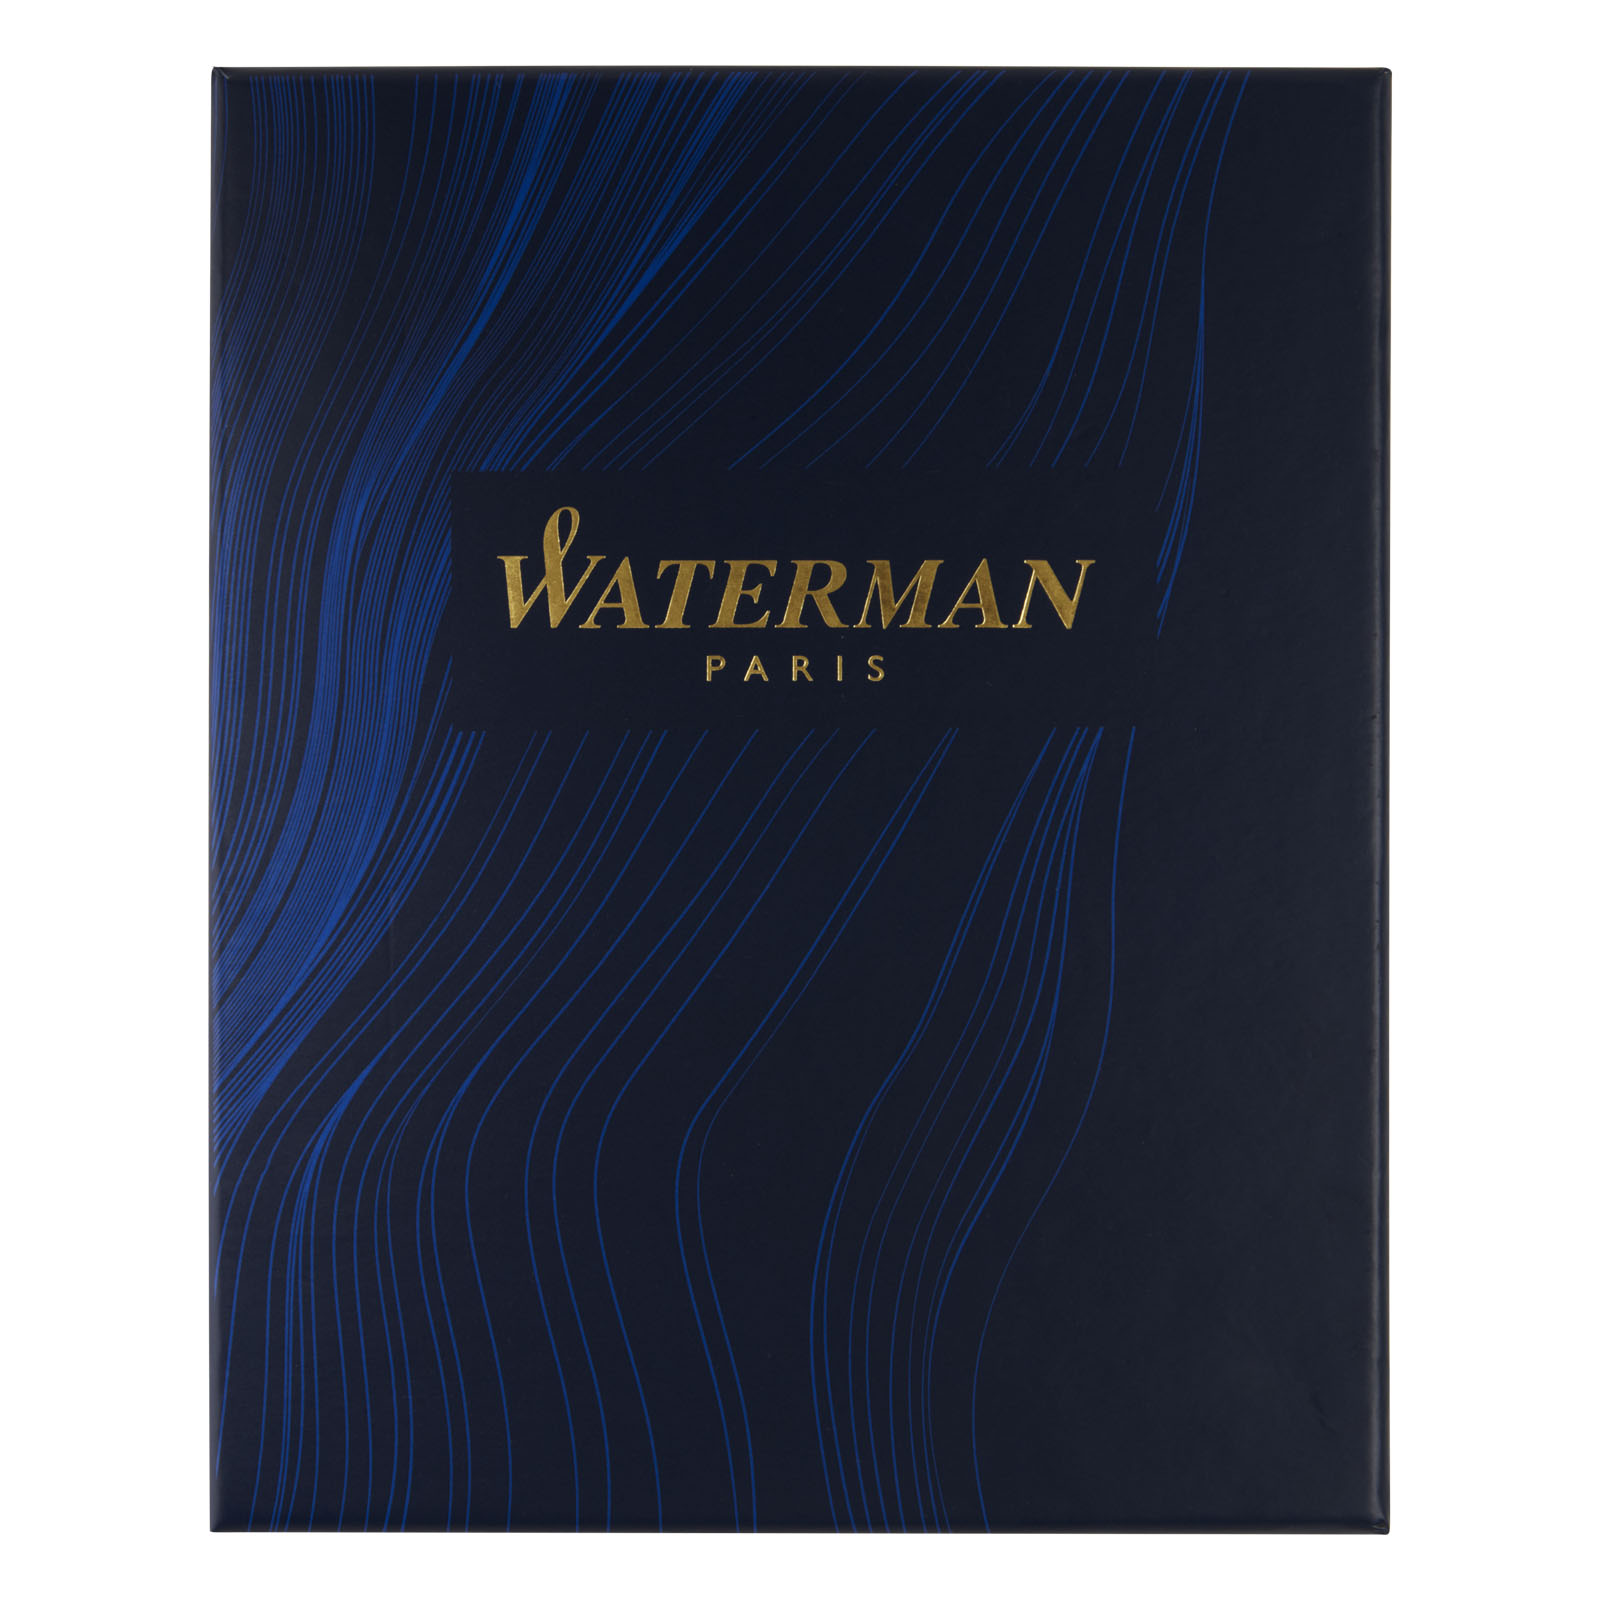 Advertising Other Pens & Writing Accessories - Waterman duo pen gift box - 2